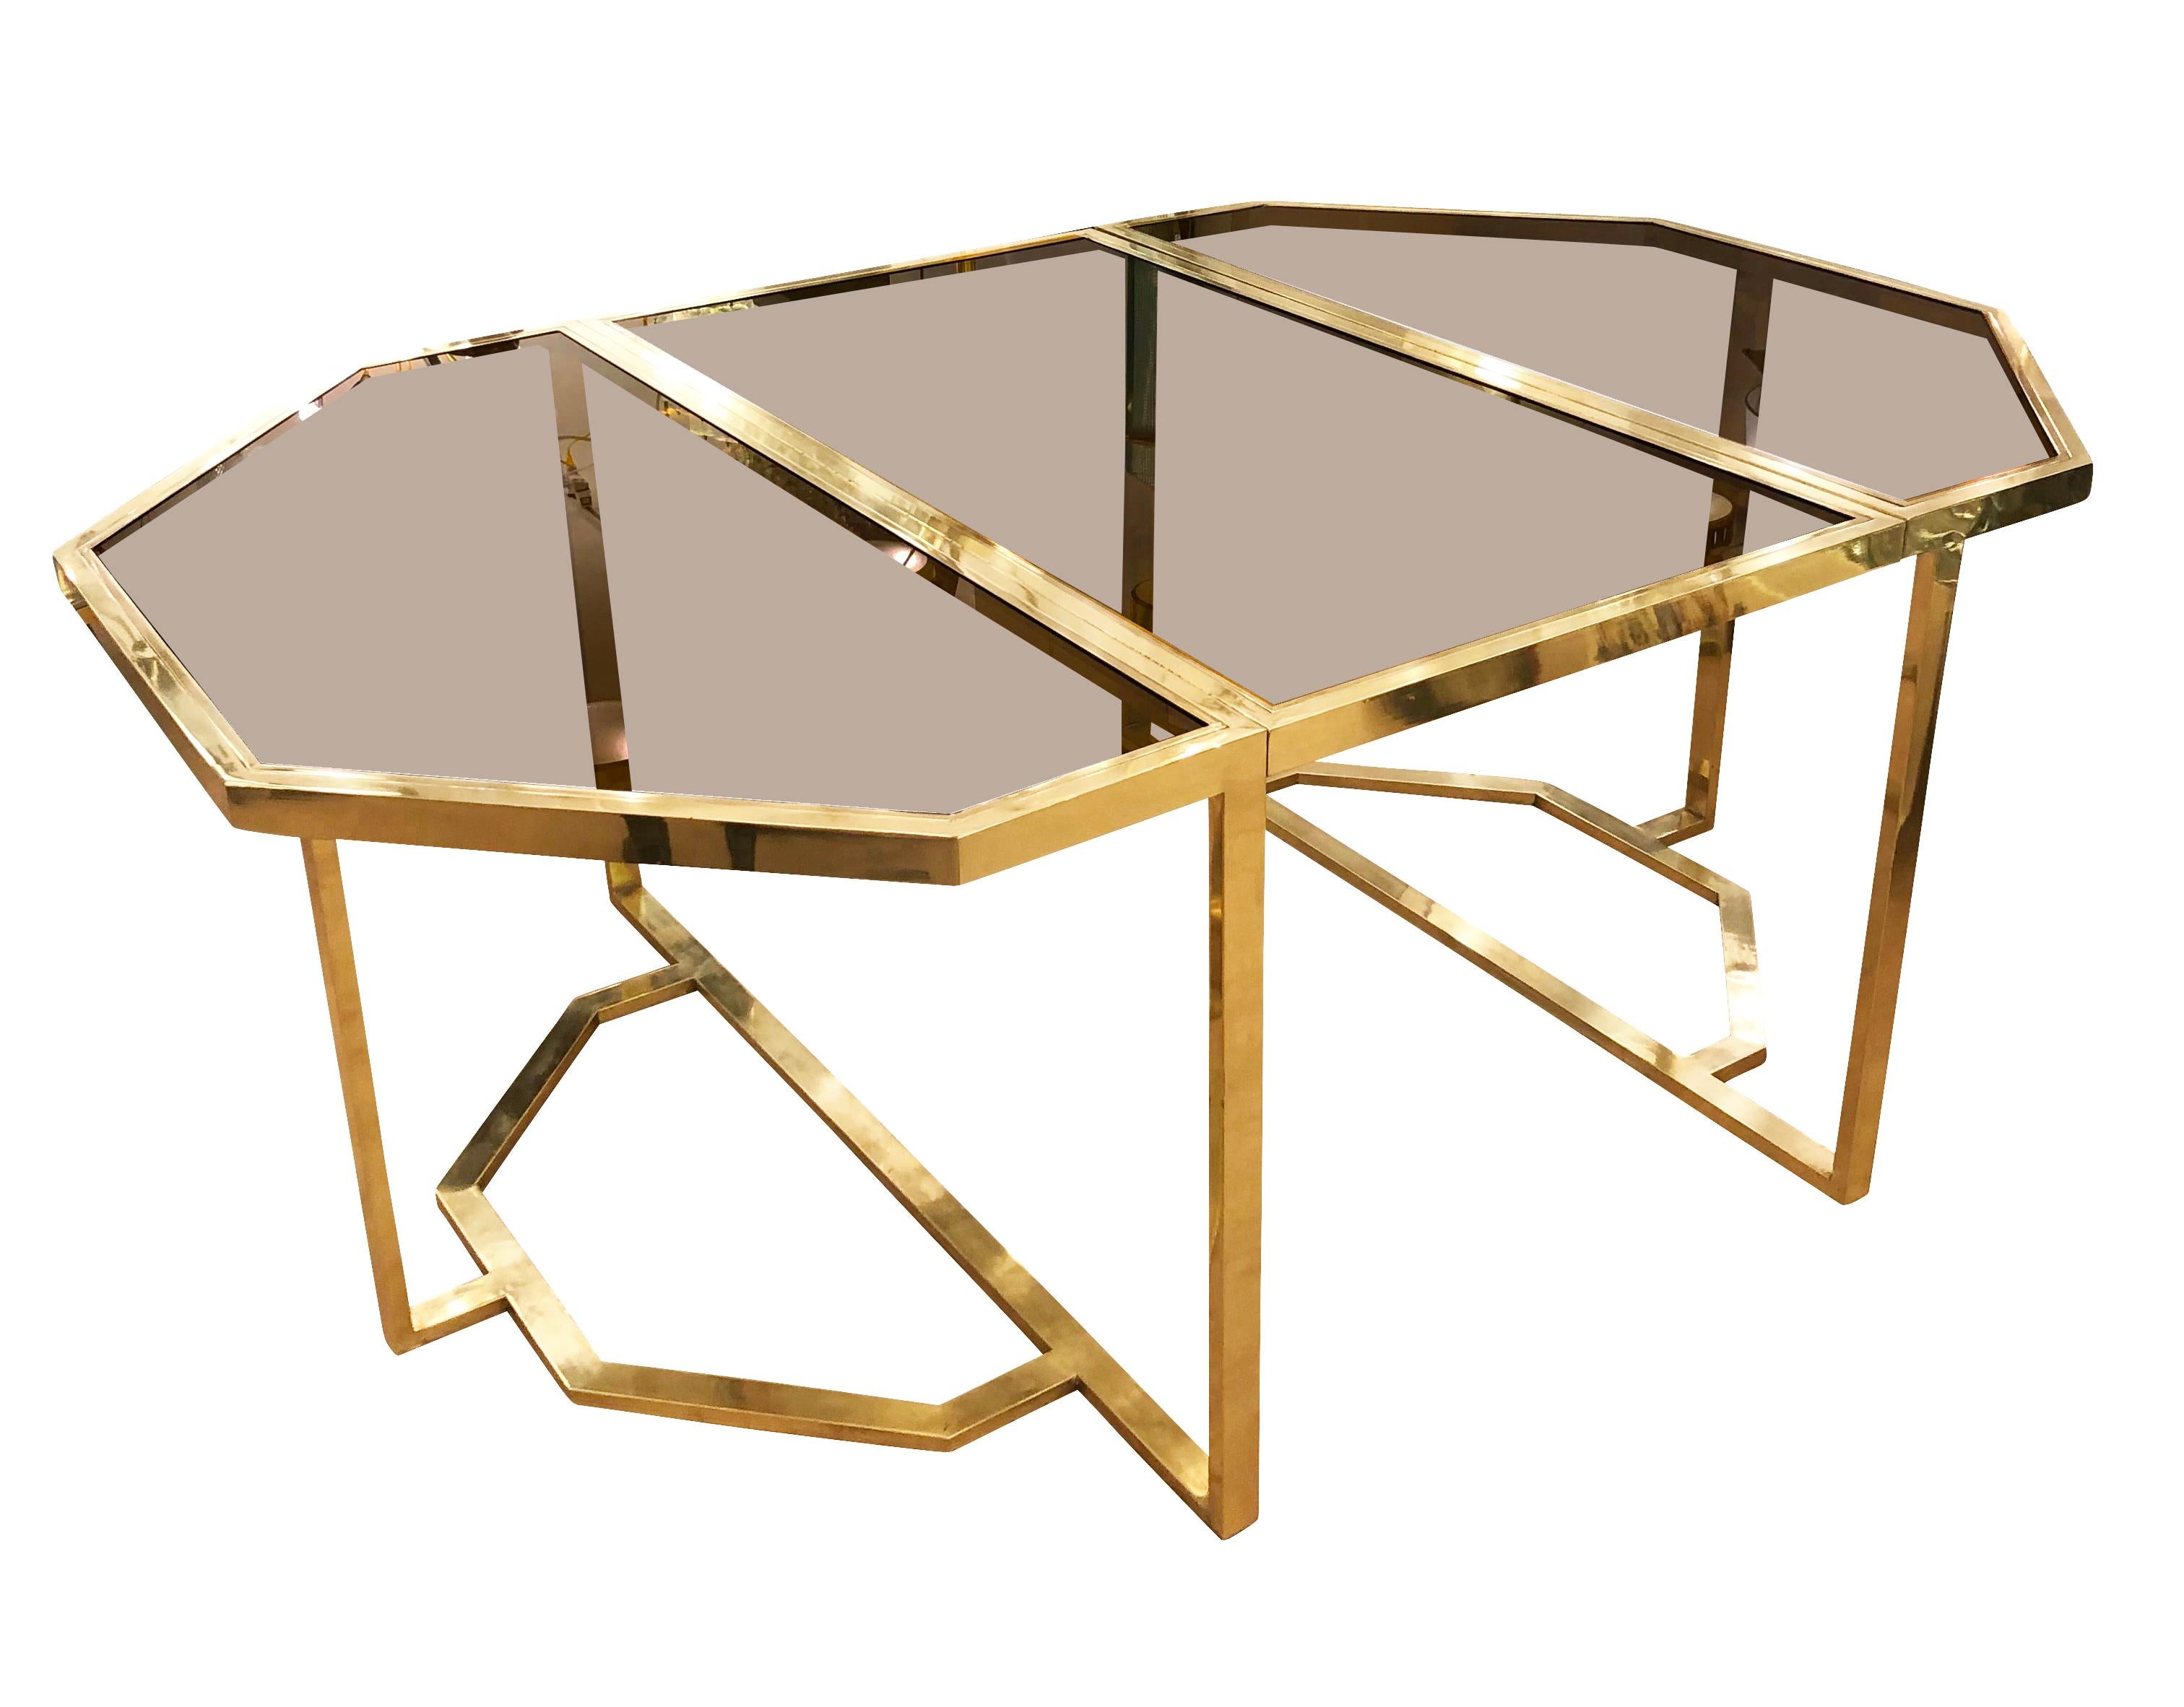 Octagonal dining table by Romeo Rega with brass framing and smoked glass tops. At the center it has a folding leaf to extend the piece by 28”. The two ends can also be used as consoles.

Condition: Excellent vintage condition, minor wear